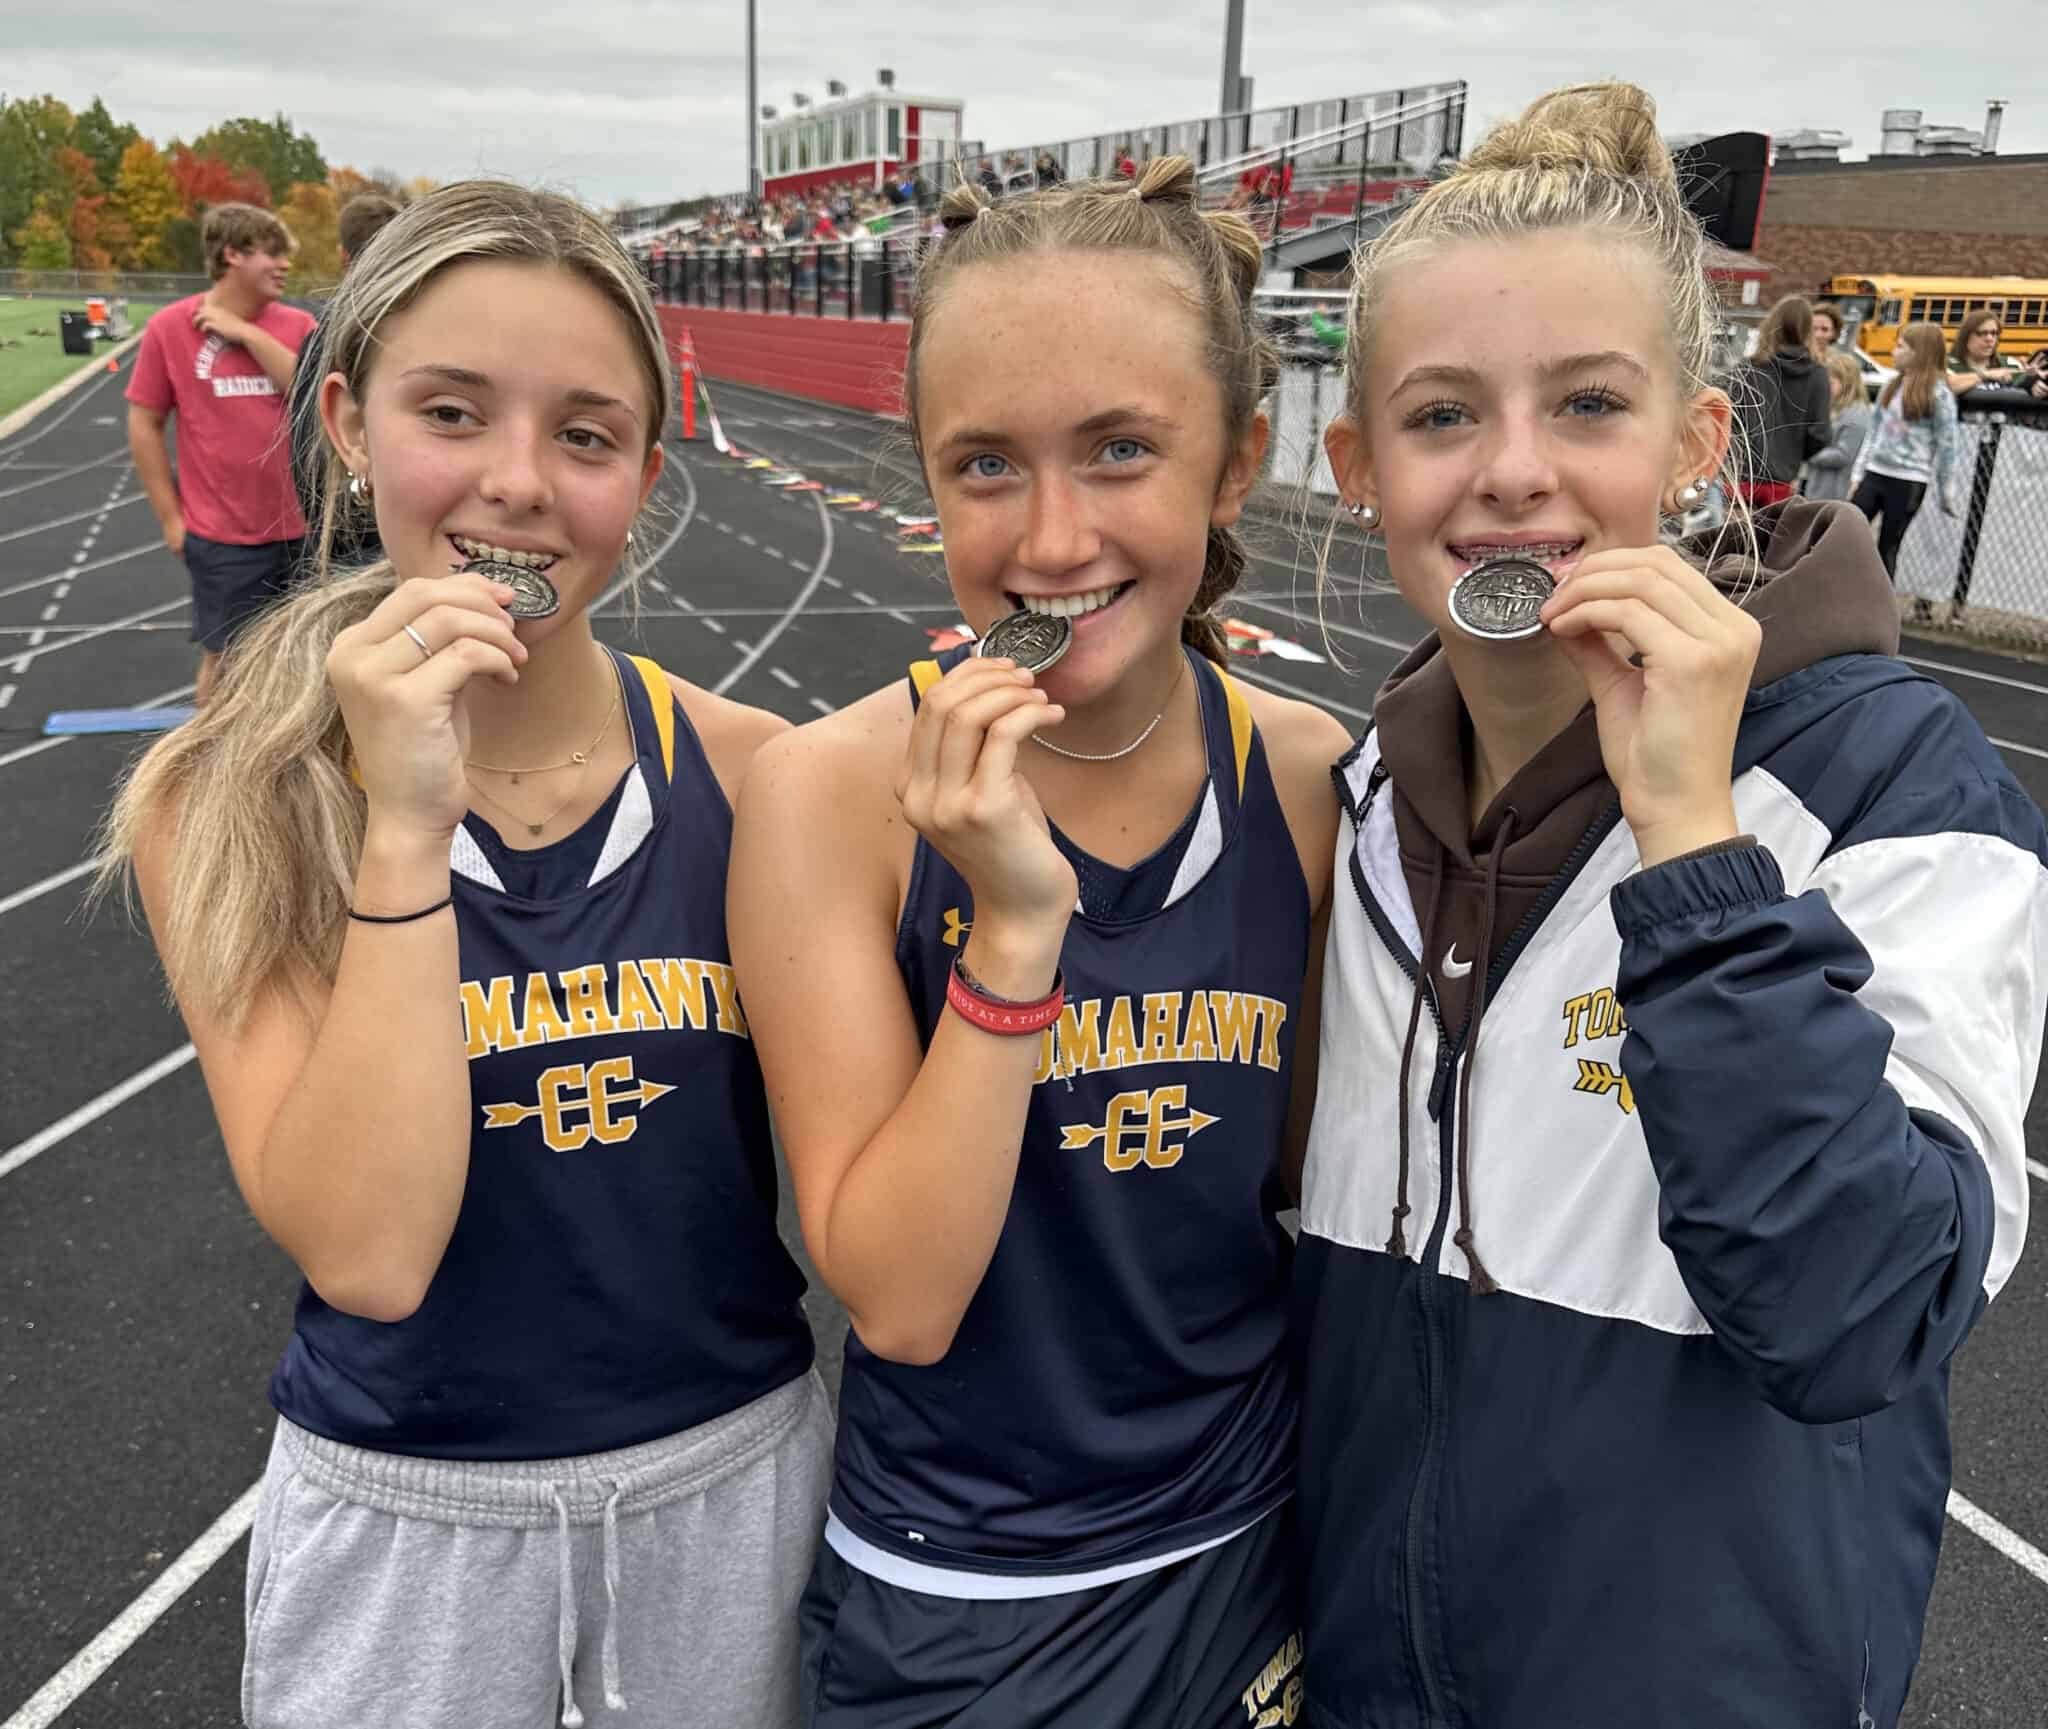 Hatchet harriers earn pair of second-place finishes in Medford